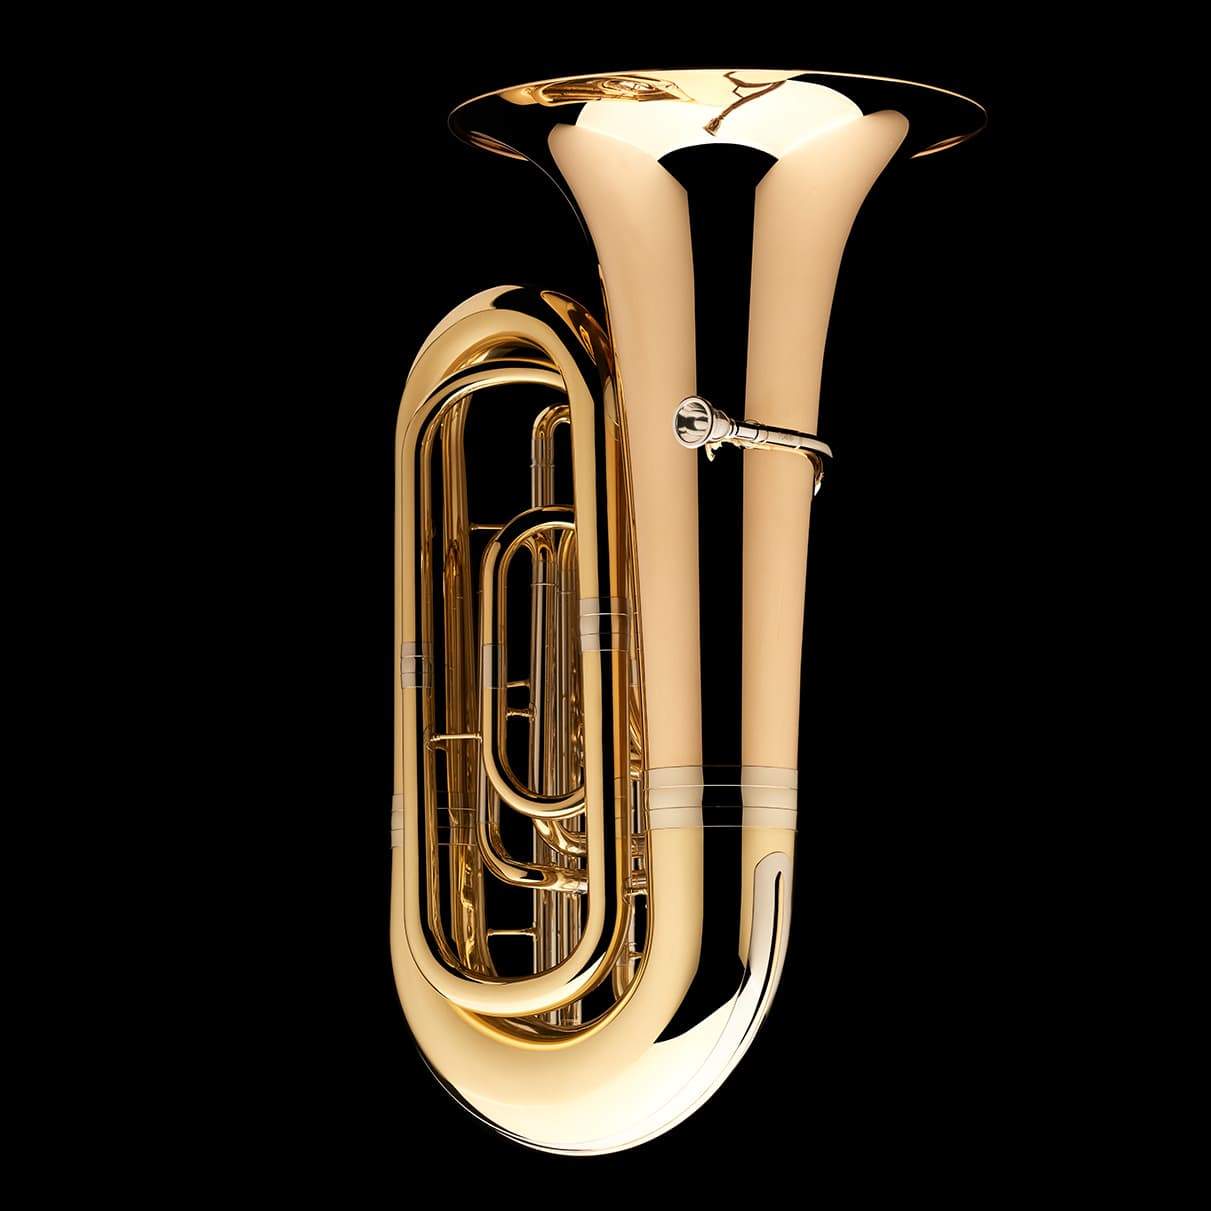 A side image of a BBb 4/4 Tuba with 5-valves 'Viverna' from Wessex Tubas